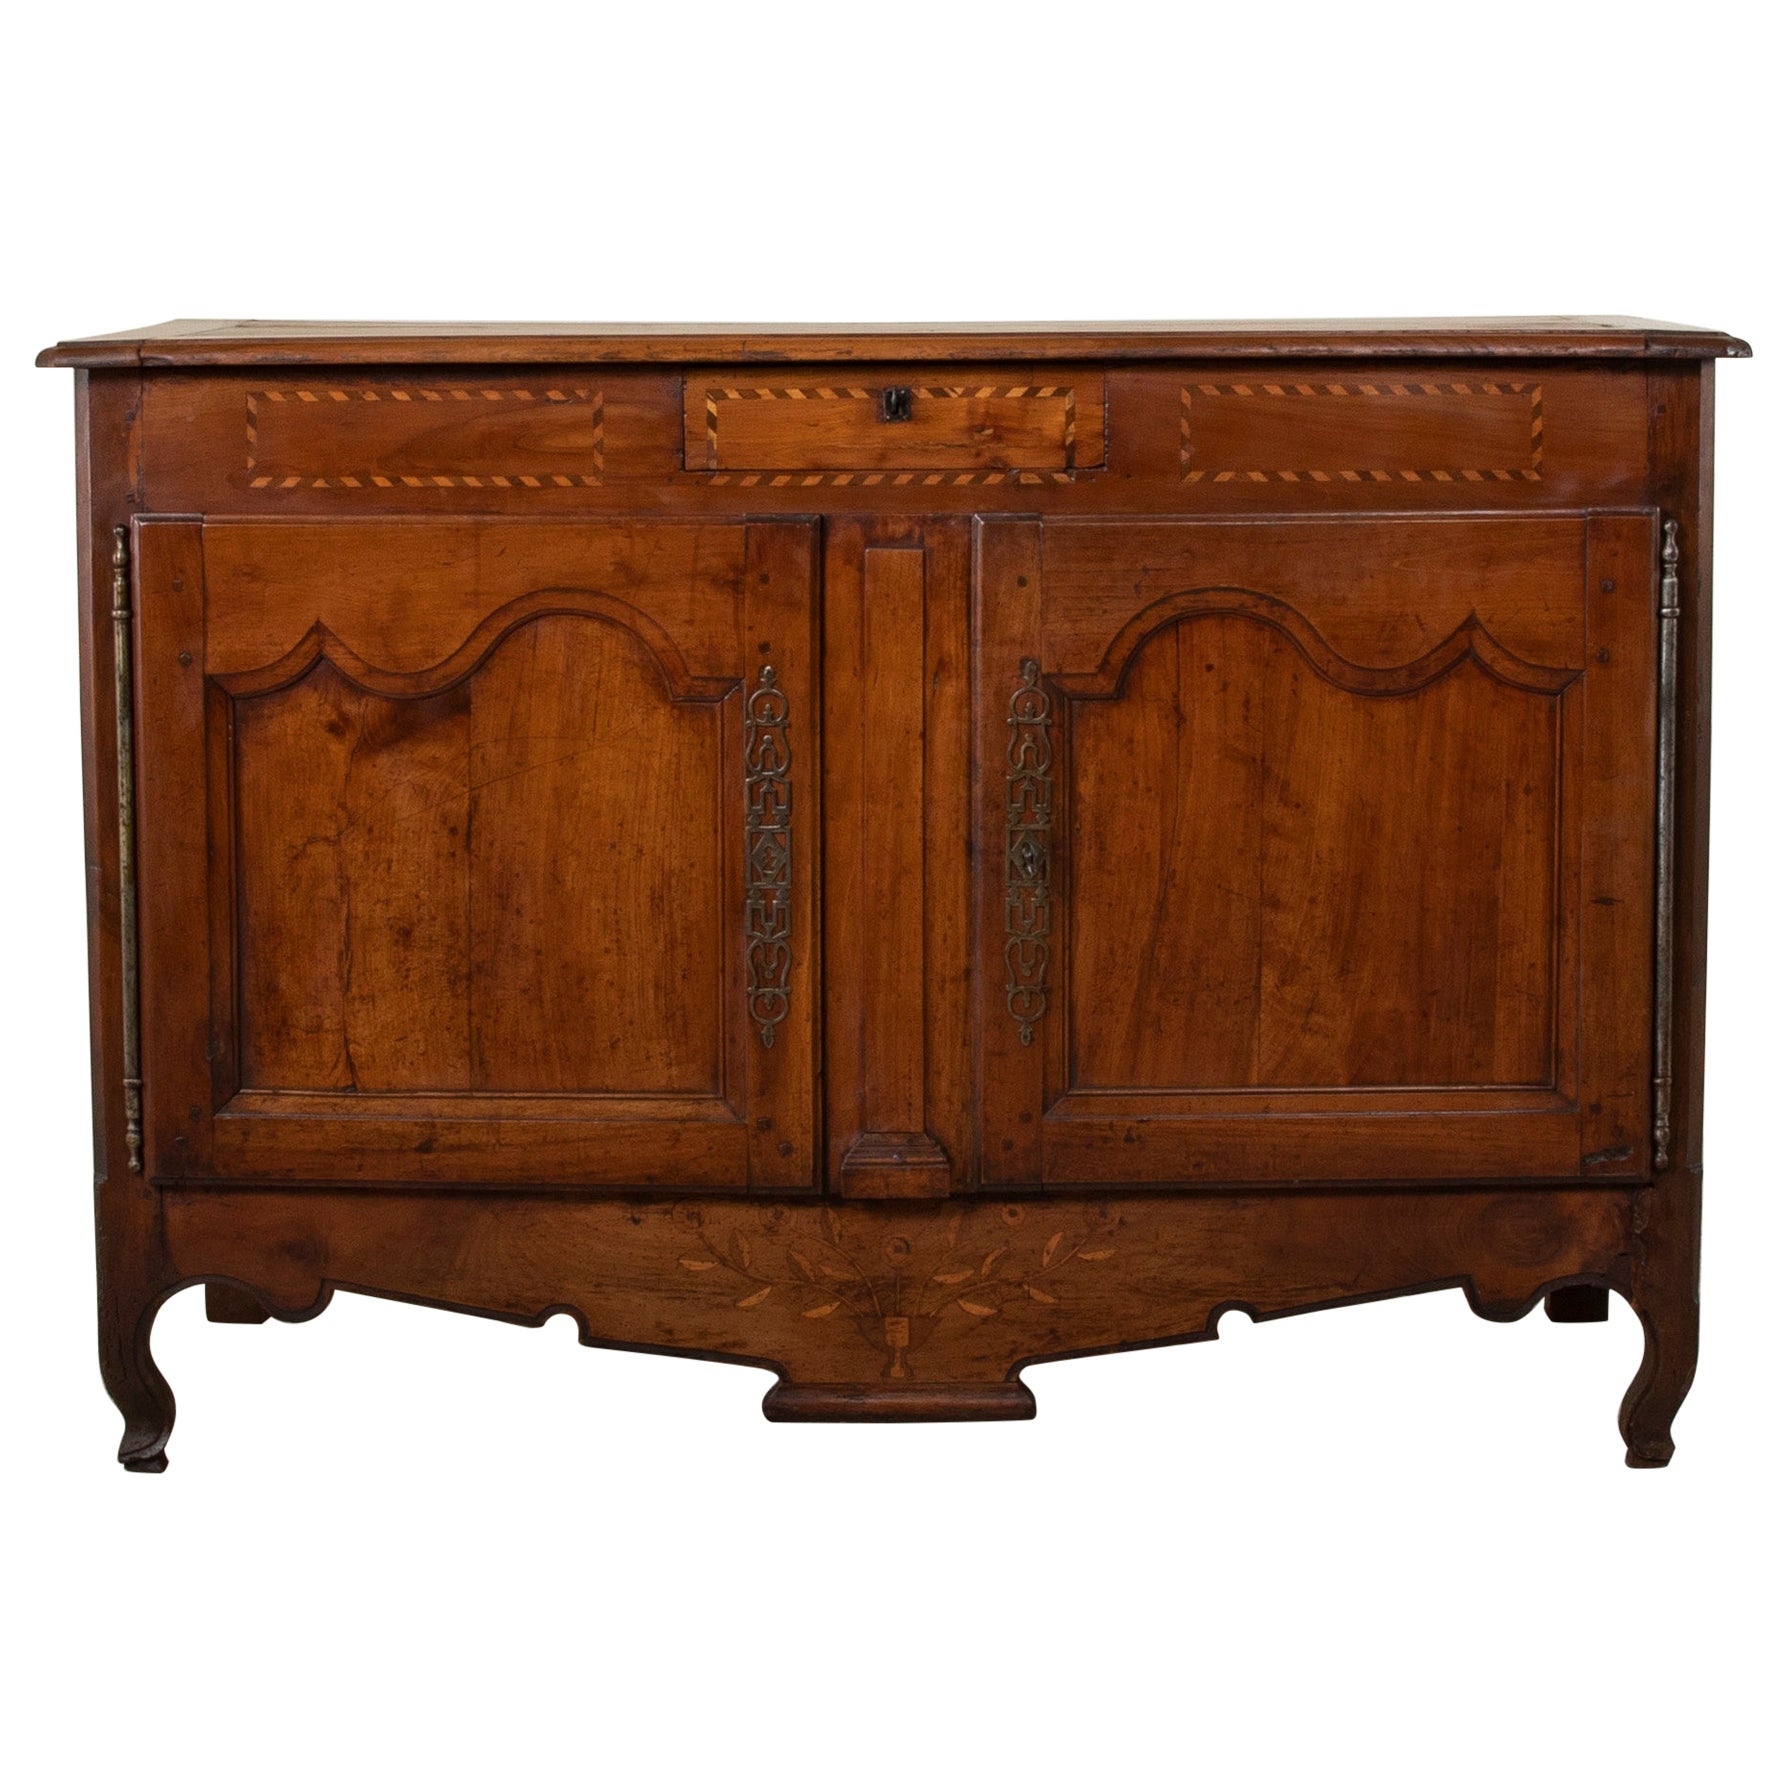 Early 19th Century French Walnut Buffet with Marquetry From the Dordogne Region For Sale